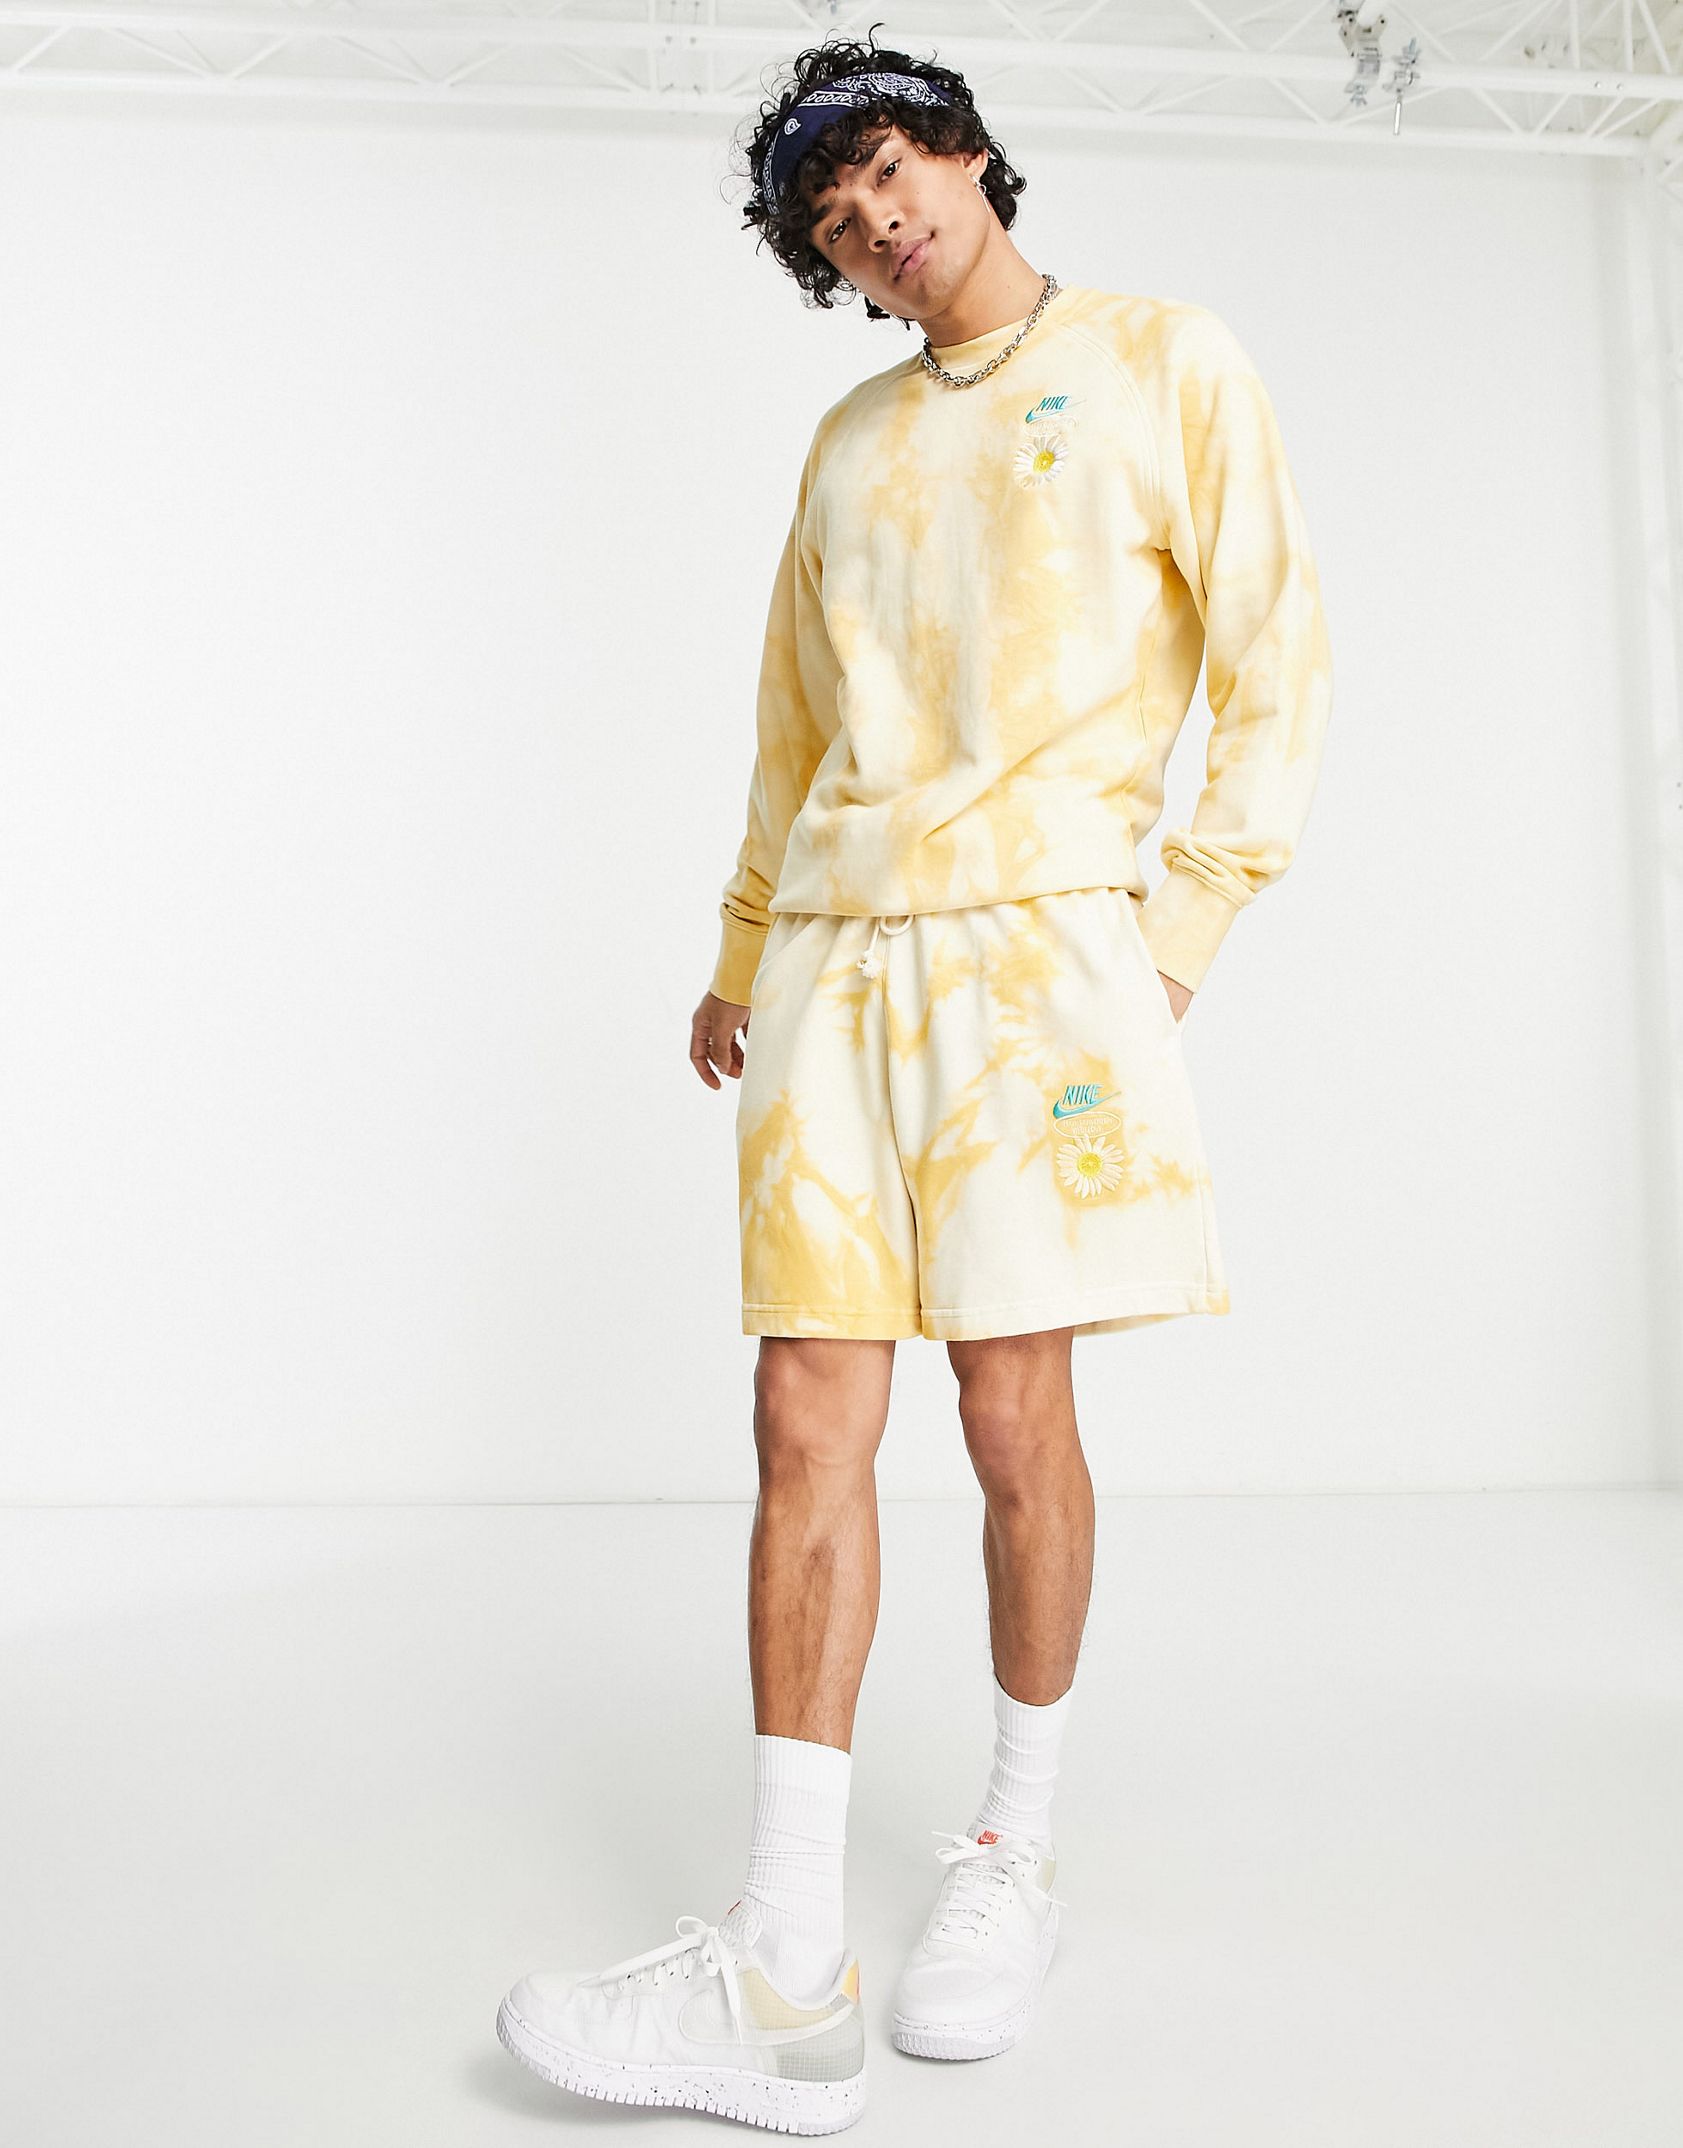 Nike 'Have a Nike Day' embroidered tie-dye sweat shorts in washed gold